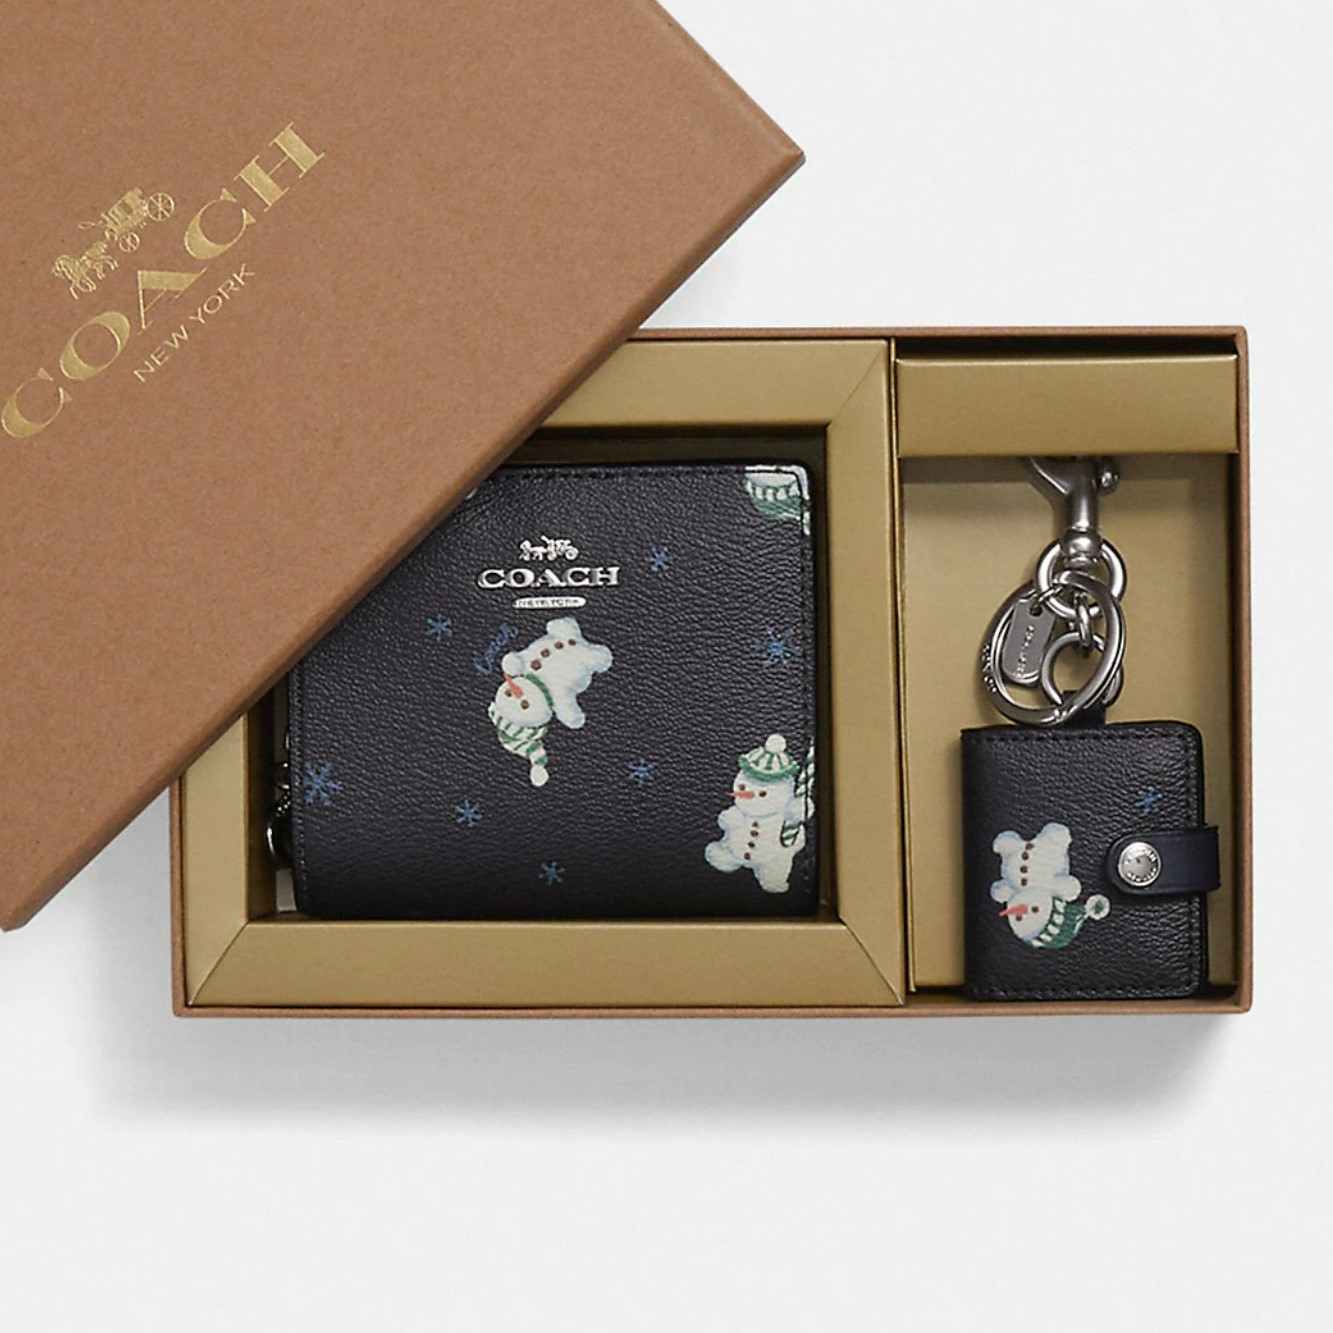 VÍ COACH NỮ BOXED SNAP WALLET AND PICTURE FRAME BAG CHARM WITH SNOWMAN PRINT 12